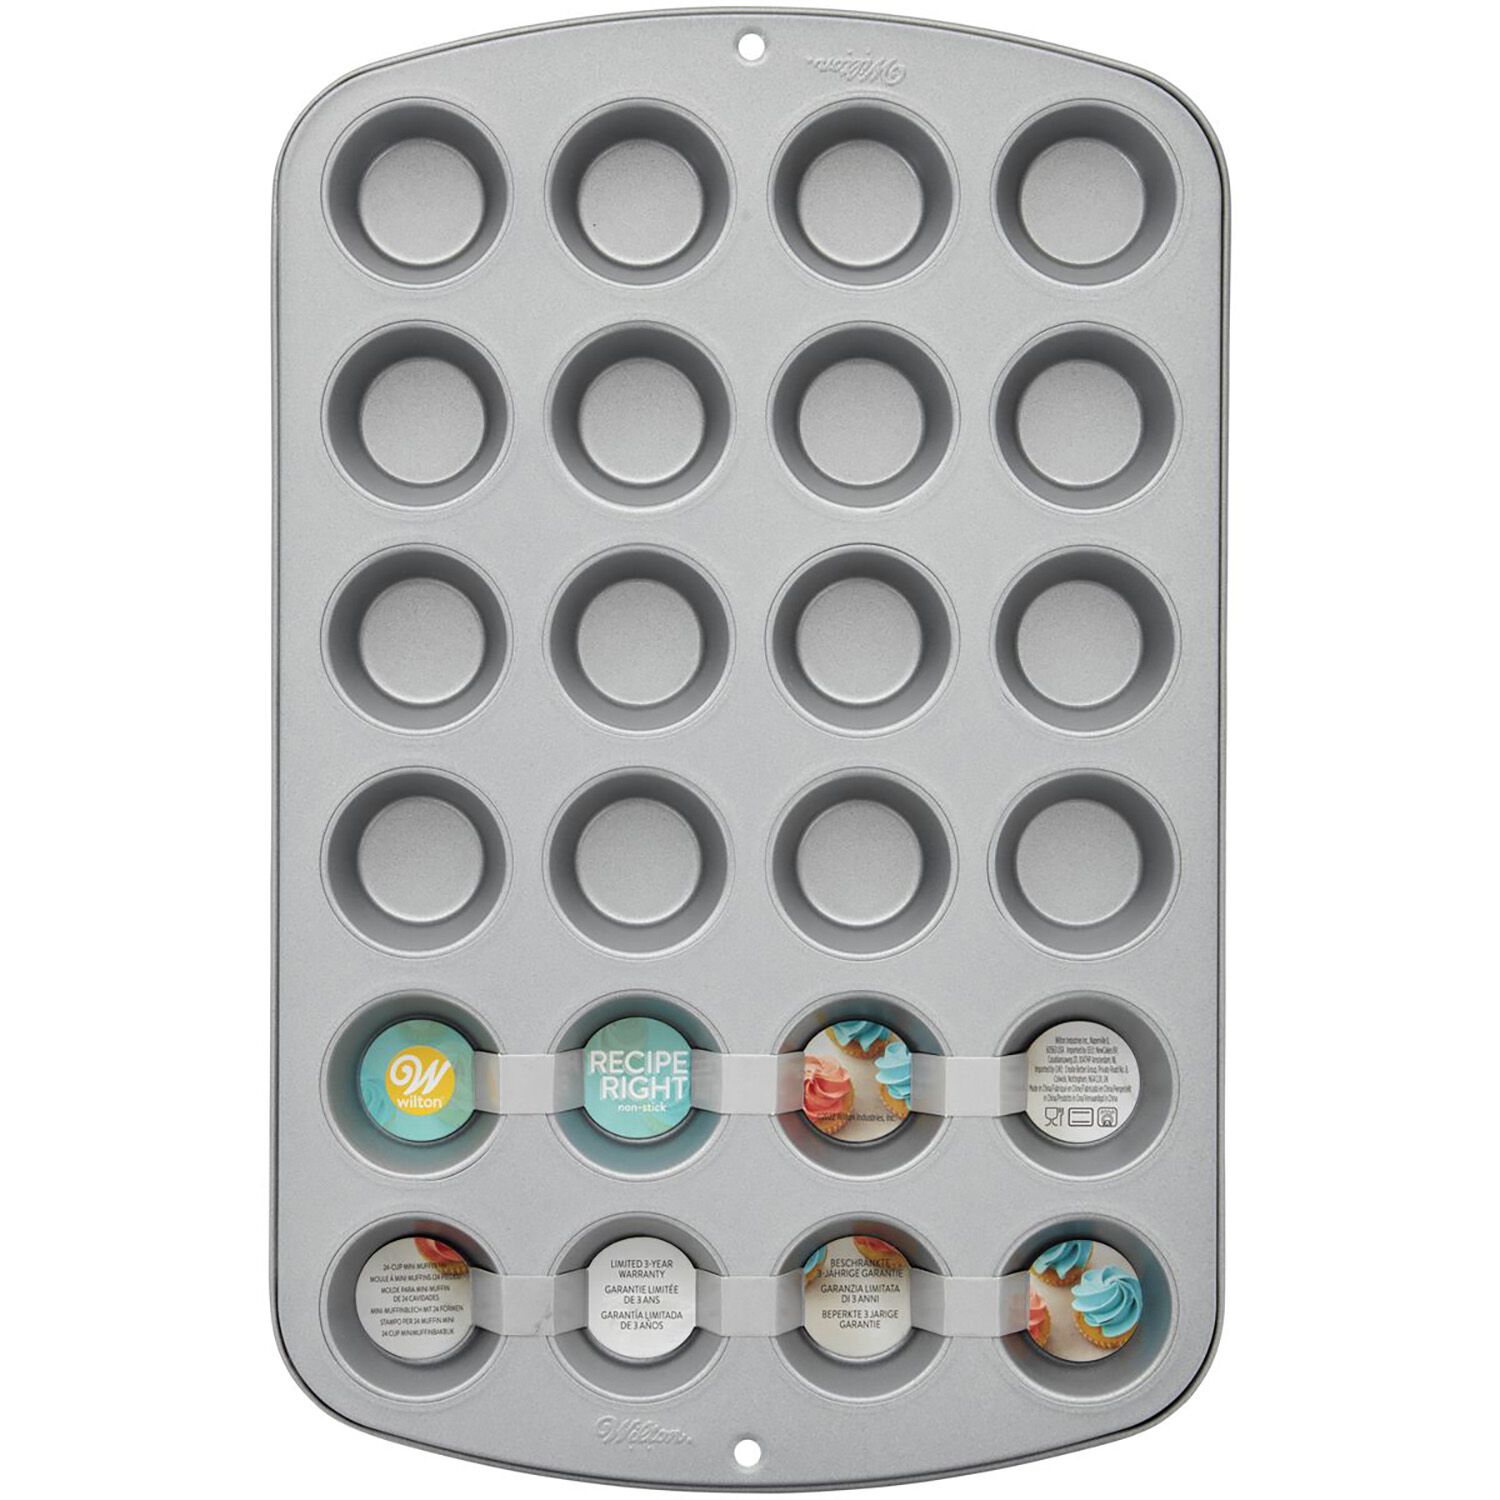 https://www.homestoreandmore.ie/dw/image/v2/BCBN_PRD/on/demandware.static/-/Sites-master/default/dw0e798cbe/images/Wilton-Recipe-Right-Mini-Muffin-Tray-24-Cup-baking-trays-dishes-016092-hi-res-0.jpg?sw=1500